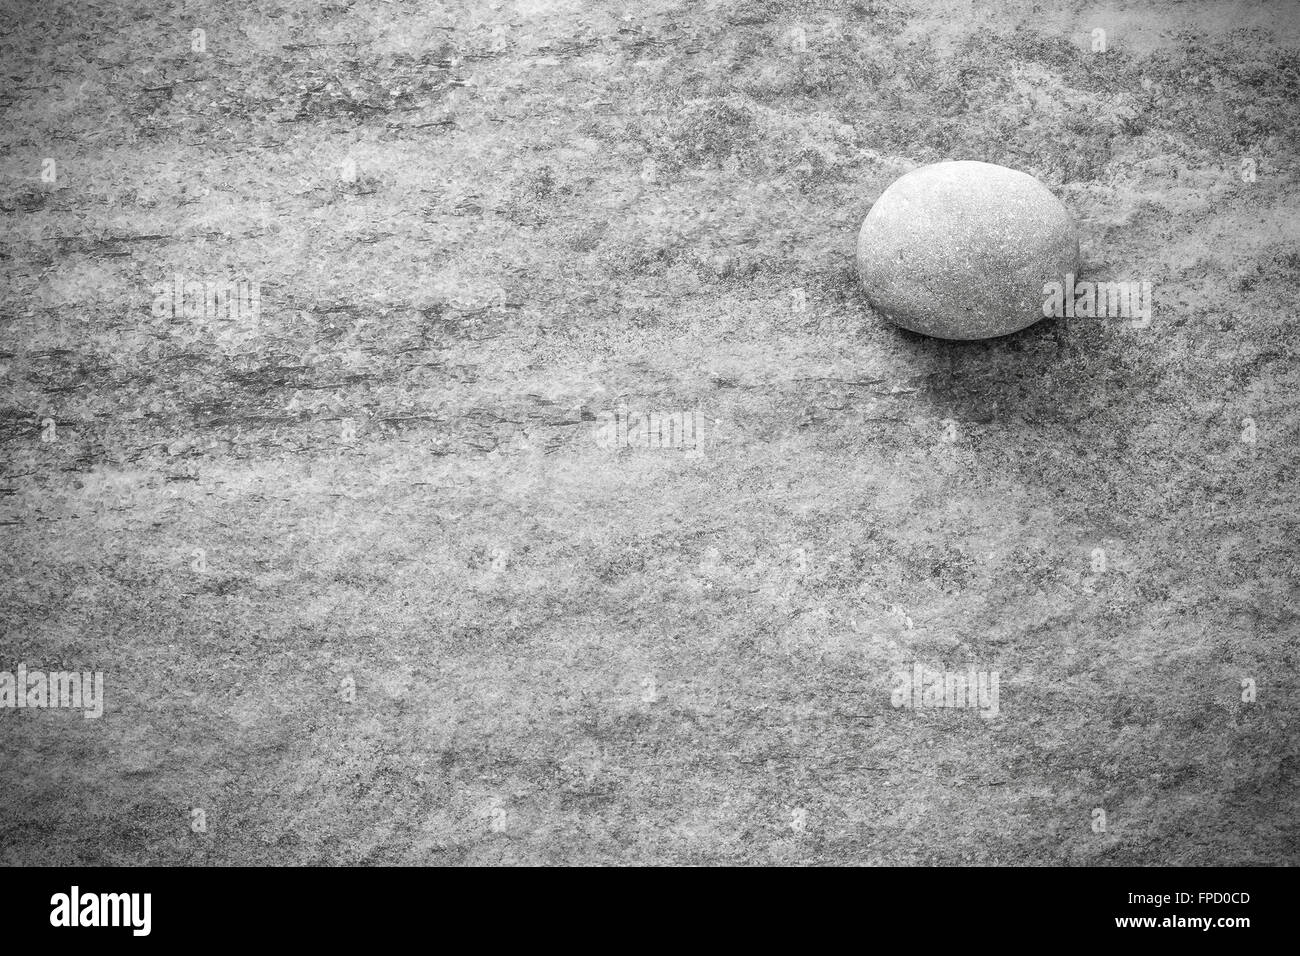 Black and white stone on rock, grunge background or texture. Stock Photo